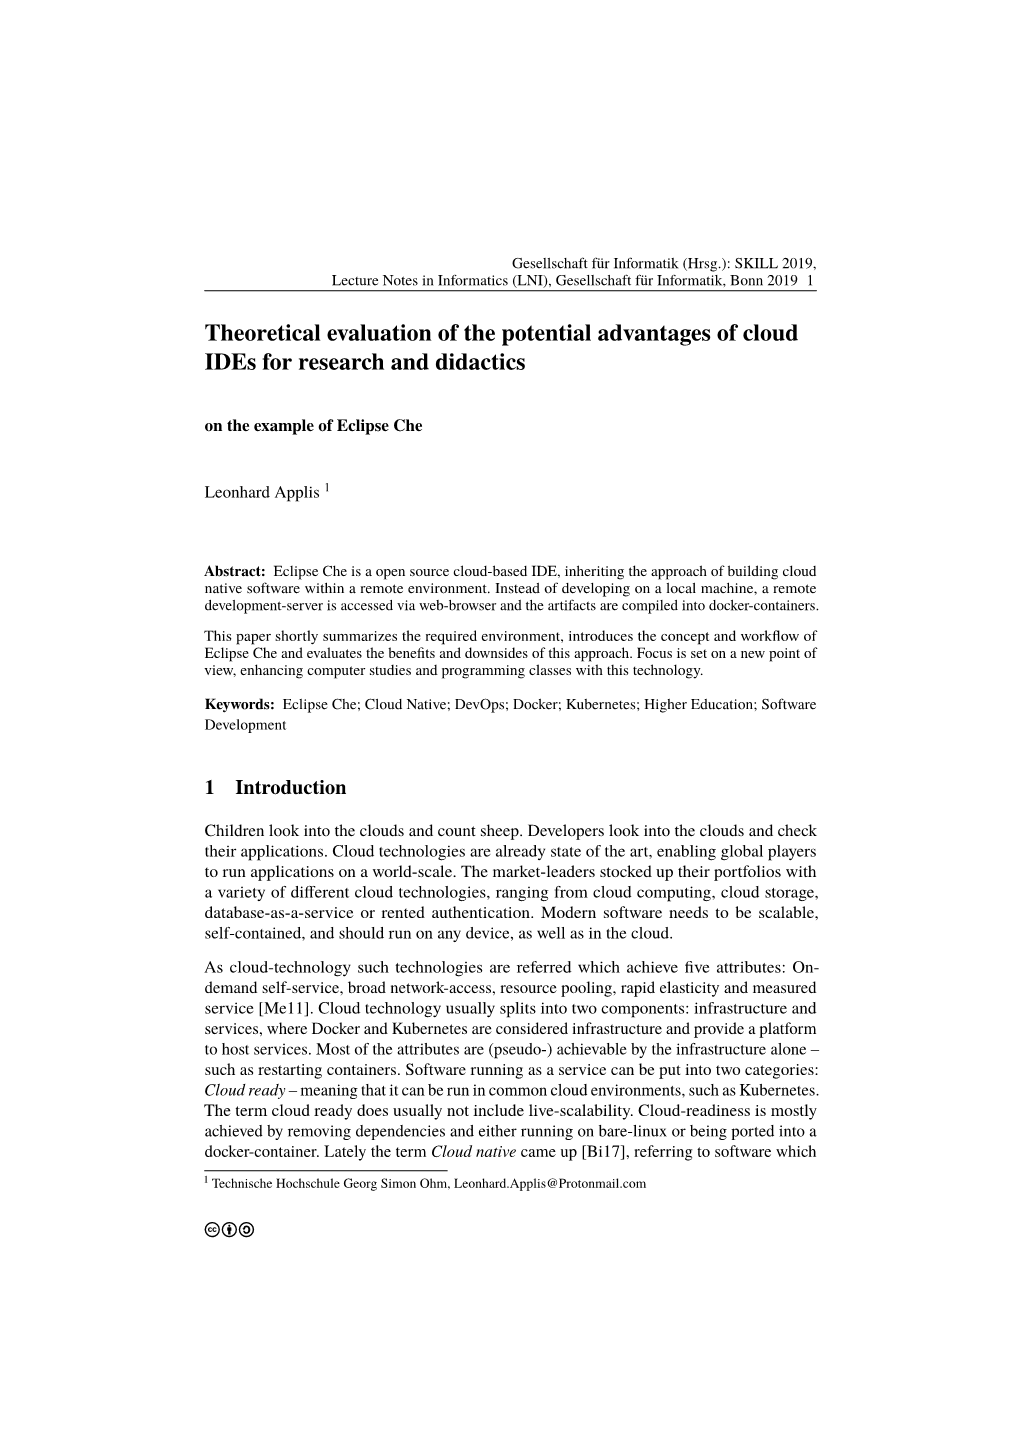 Theoretical Evaluation of the Potential Advantages of Cloud Ides for Research and Didactics on the Example of Eclipse Che